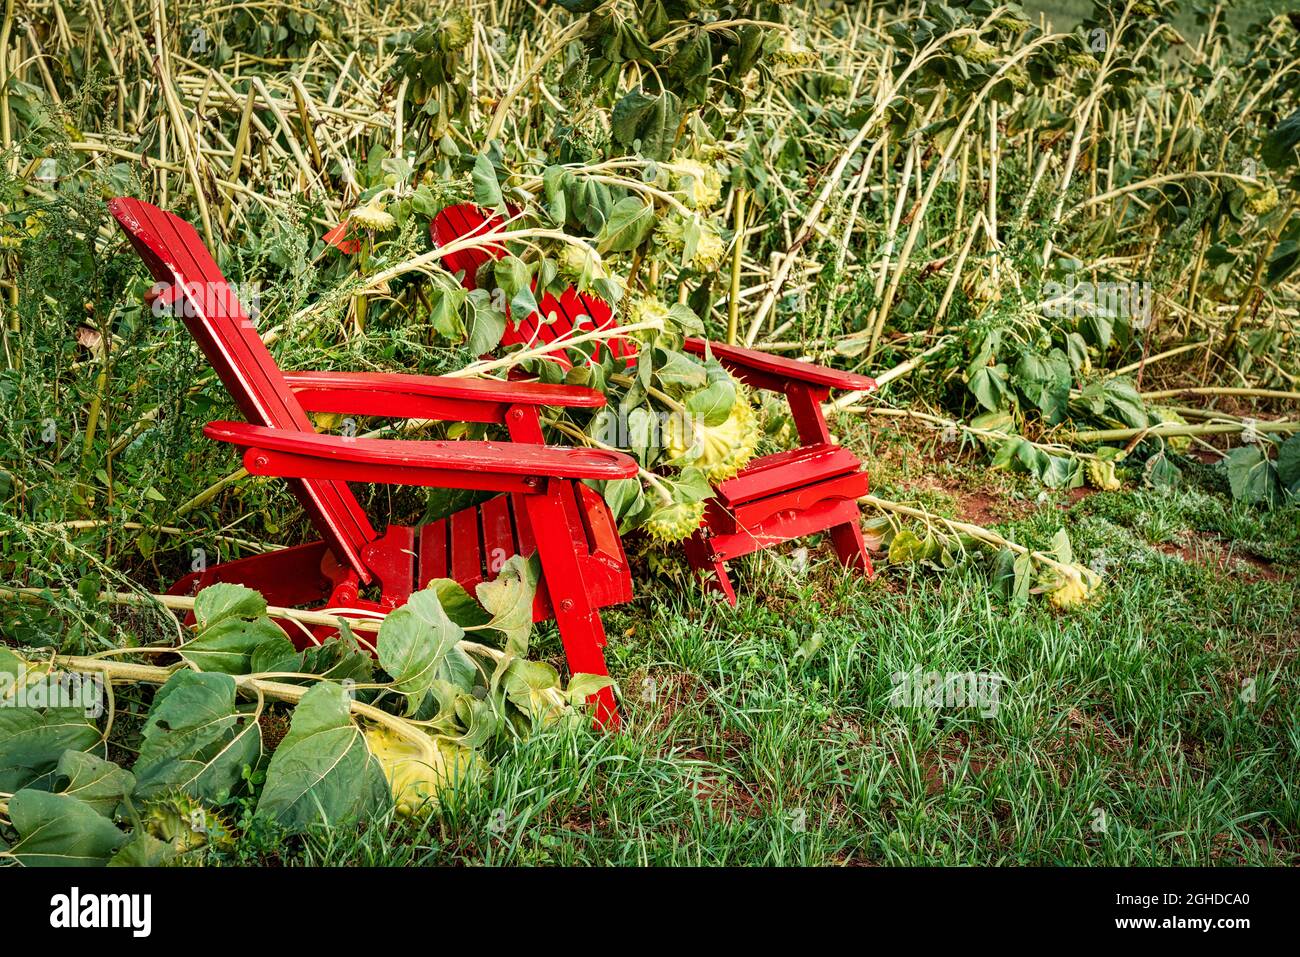 Adironack chairs in a tumbled down garden or field of sunflowers. Stock Photo